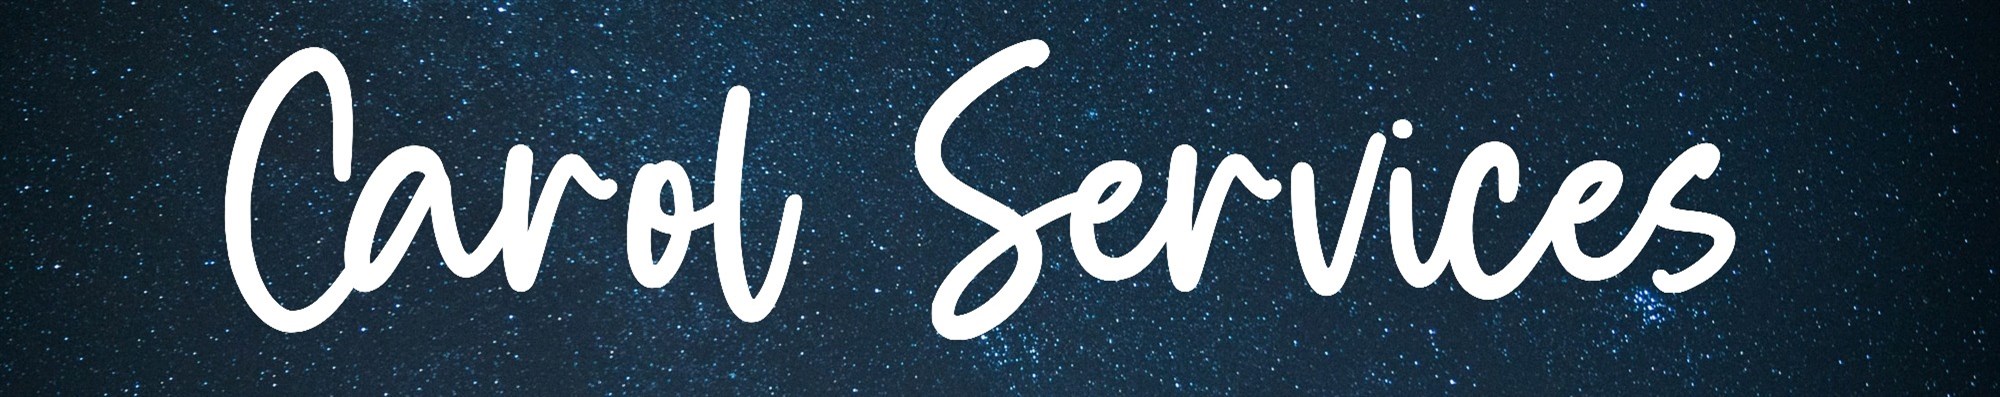 Carol Services Page Banner